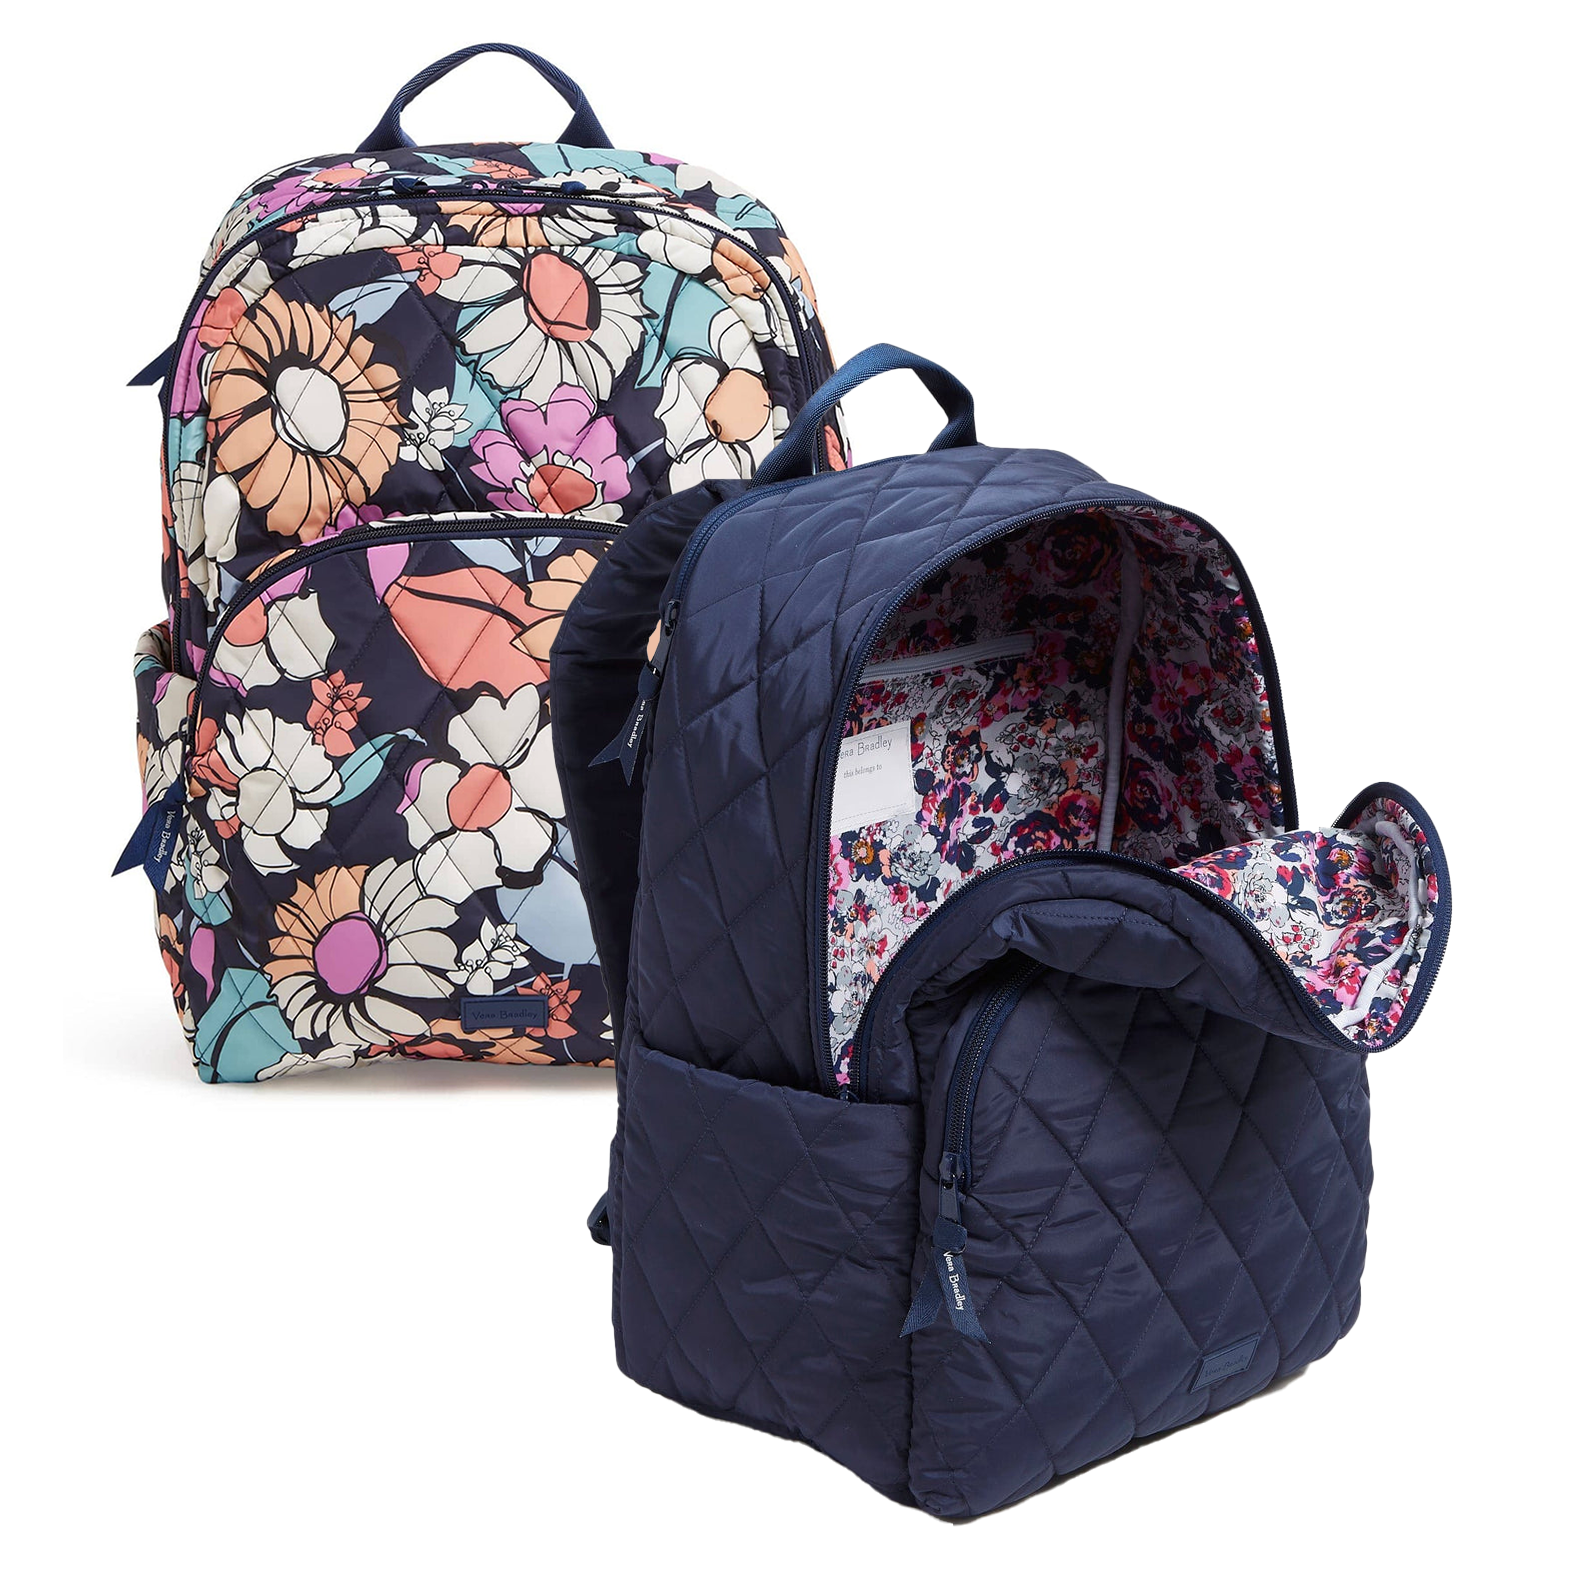 Two backpacks with quilted design; one features a floral pattern and the other is solid navy, both with front pockets and zipped compartments.